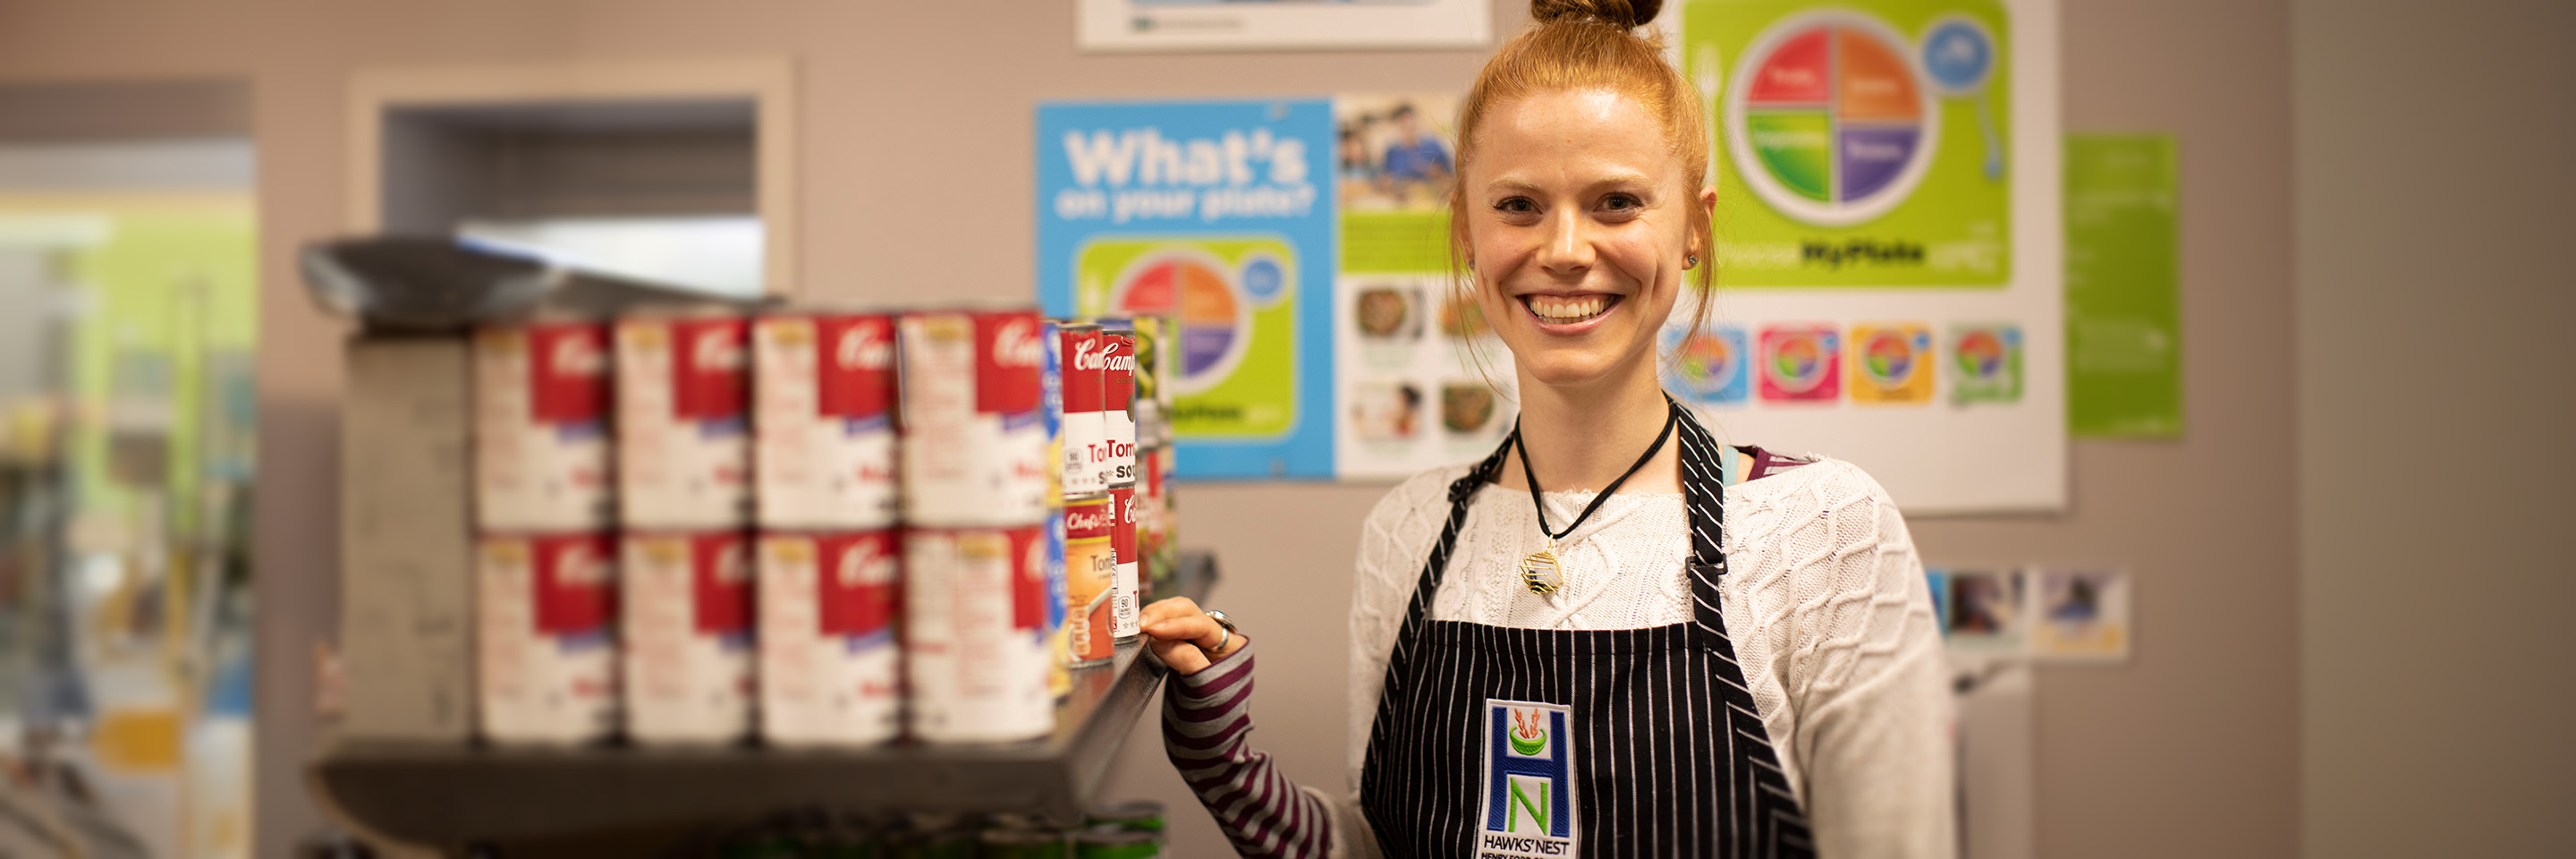 Student wearing an apron with the Hawks' Nest Food pantry logo, standing and smiling by a shelf of canned goods